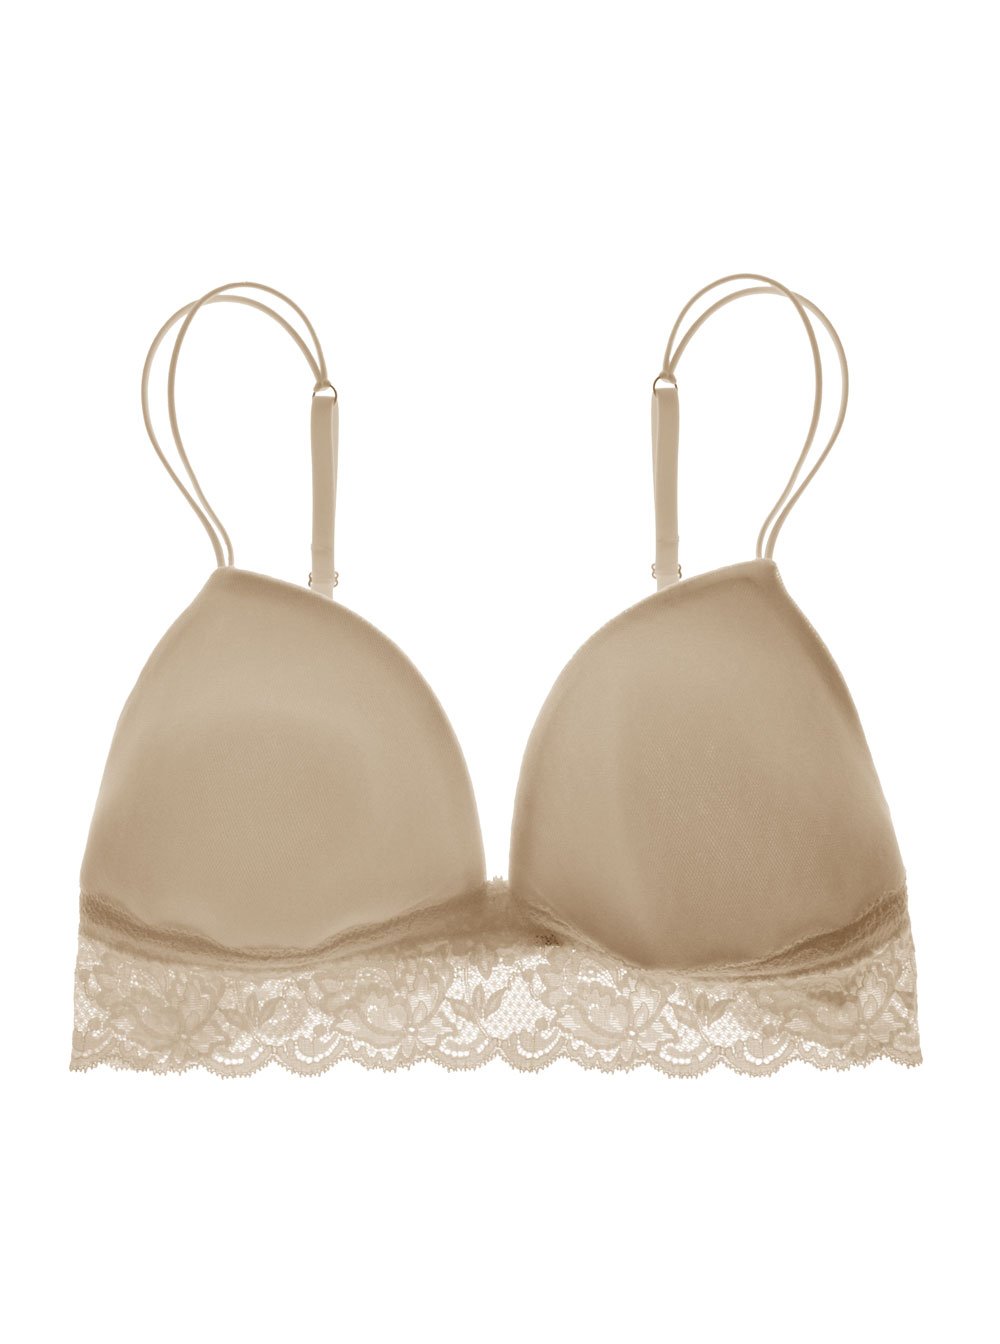 Cosabella, Never Say Never Soft Padded Bra